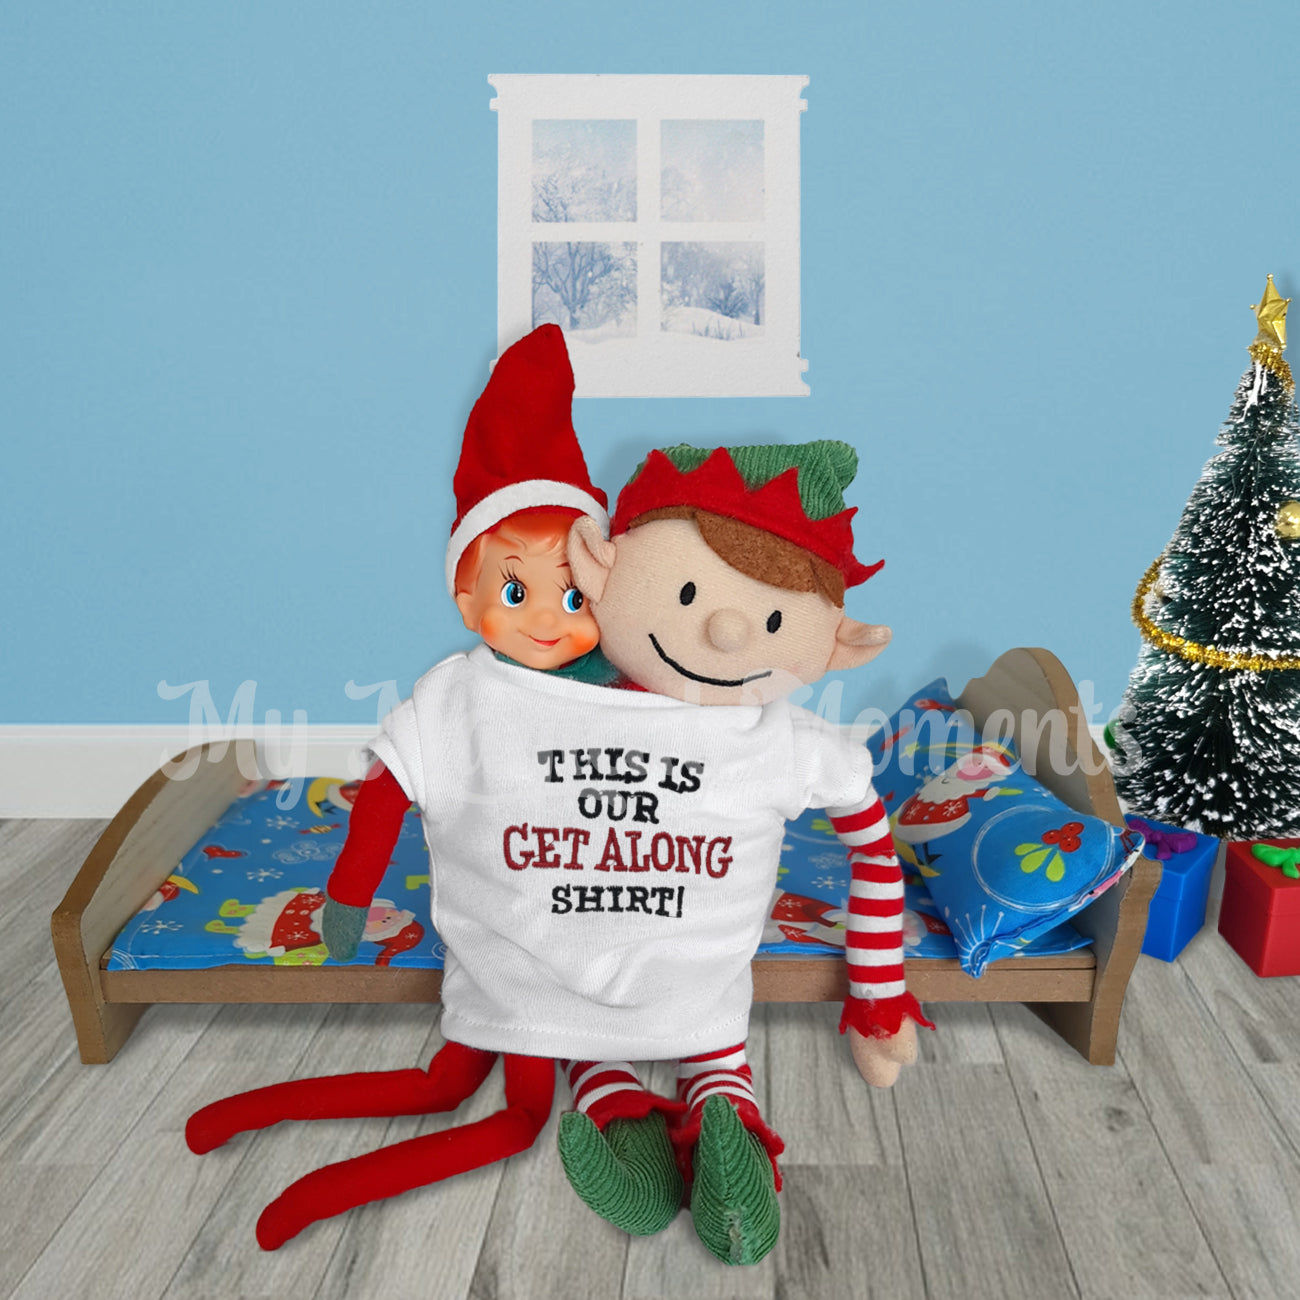 elf for christmas and elf wearing a get along elf shirt